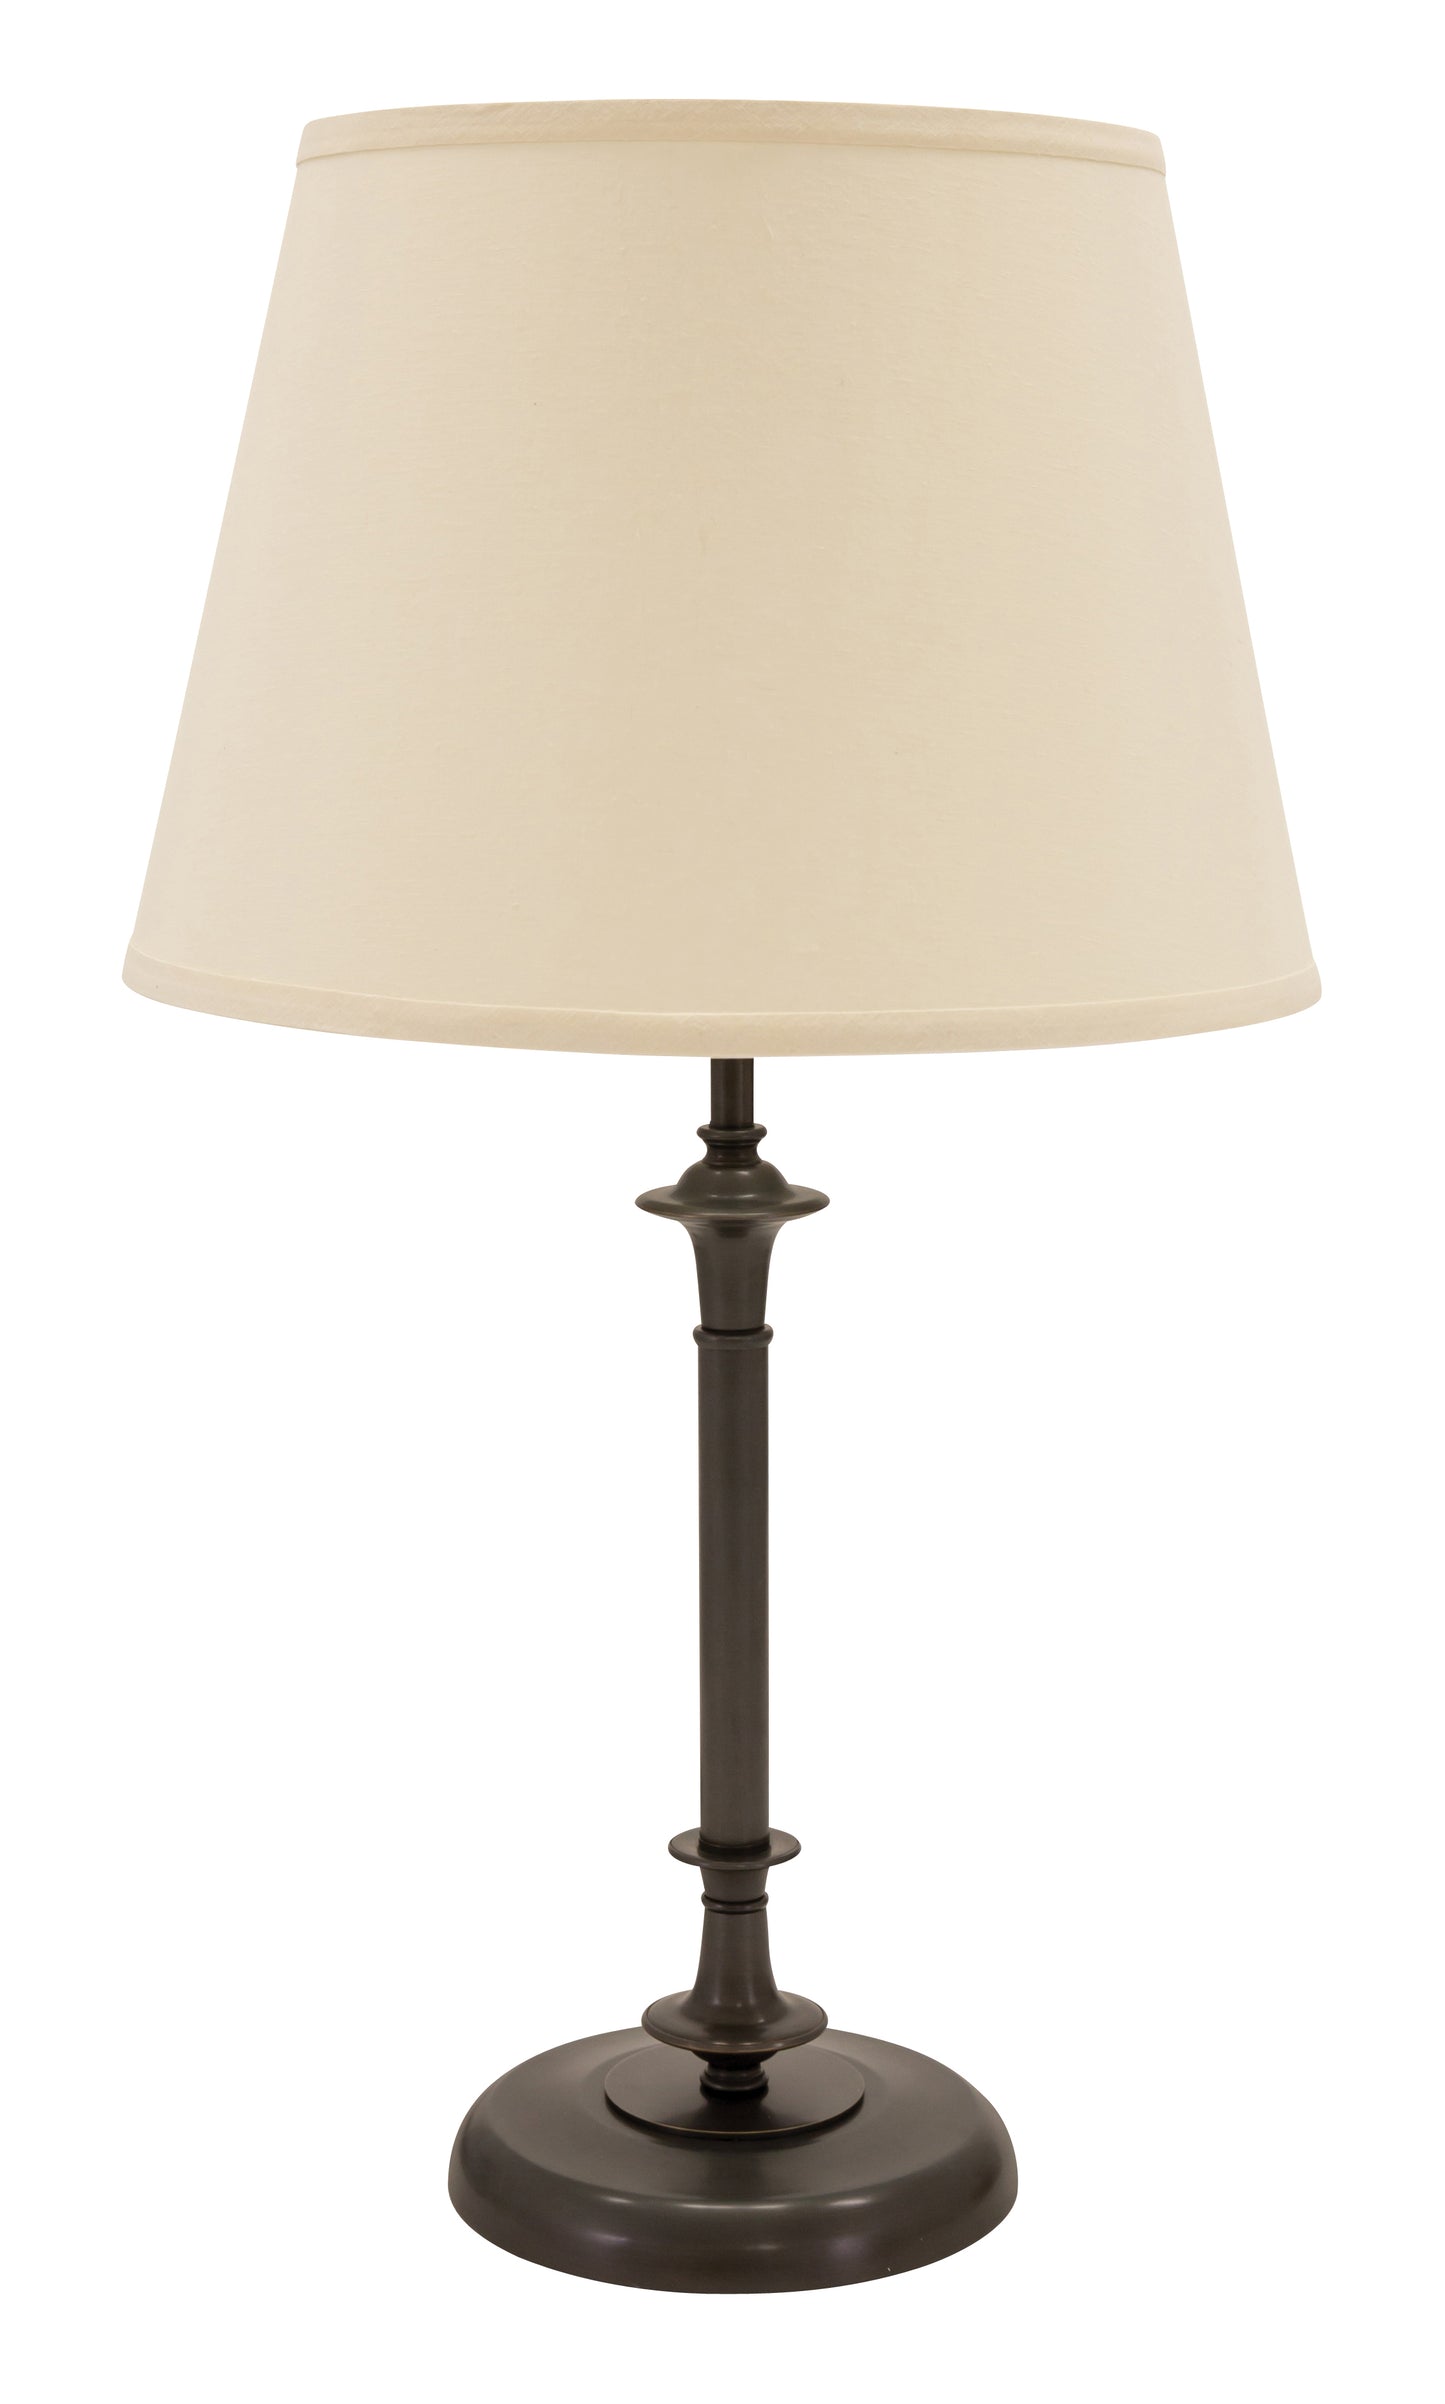 House of Troy Randolph Oil Rubbed Bronze Table Lamp RA350-OB